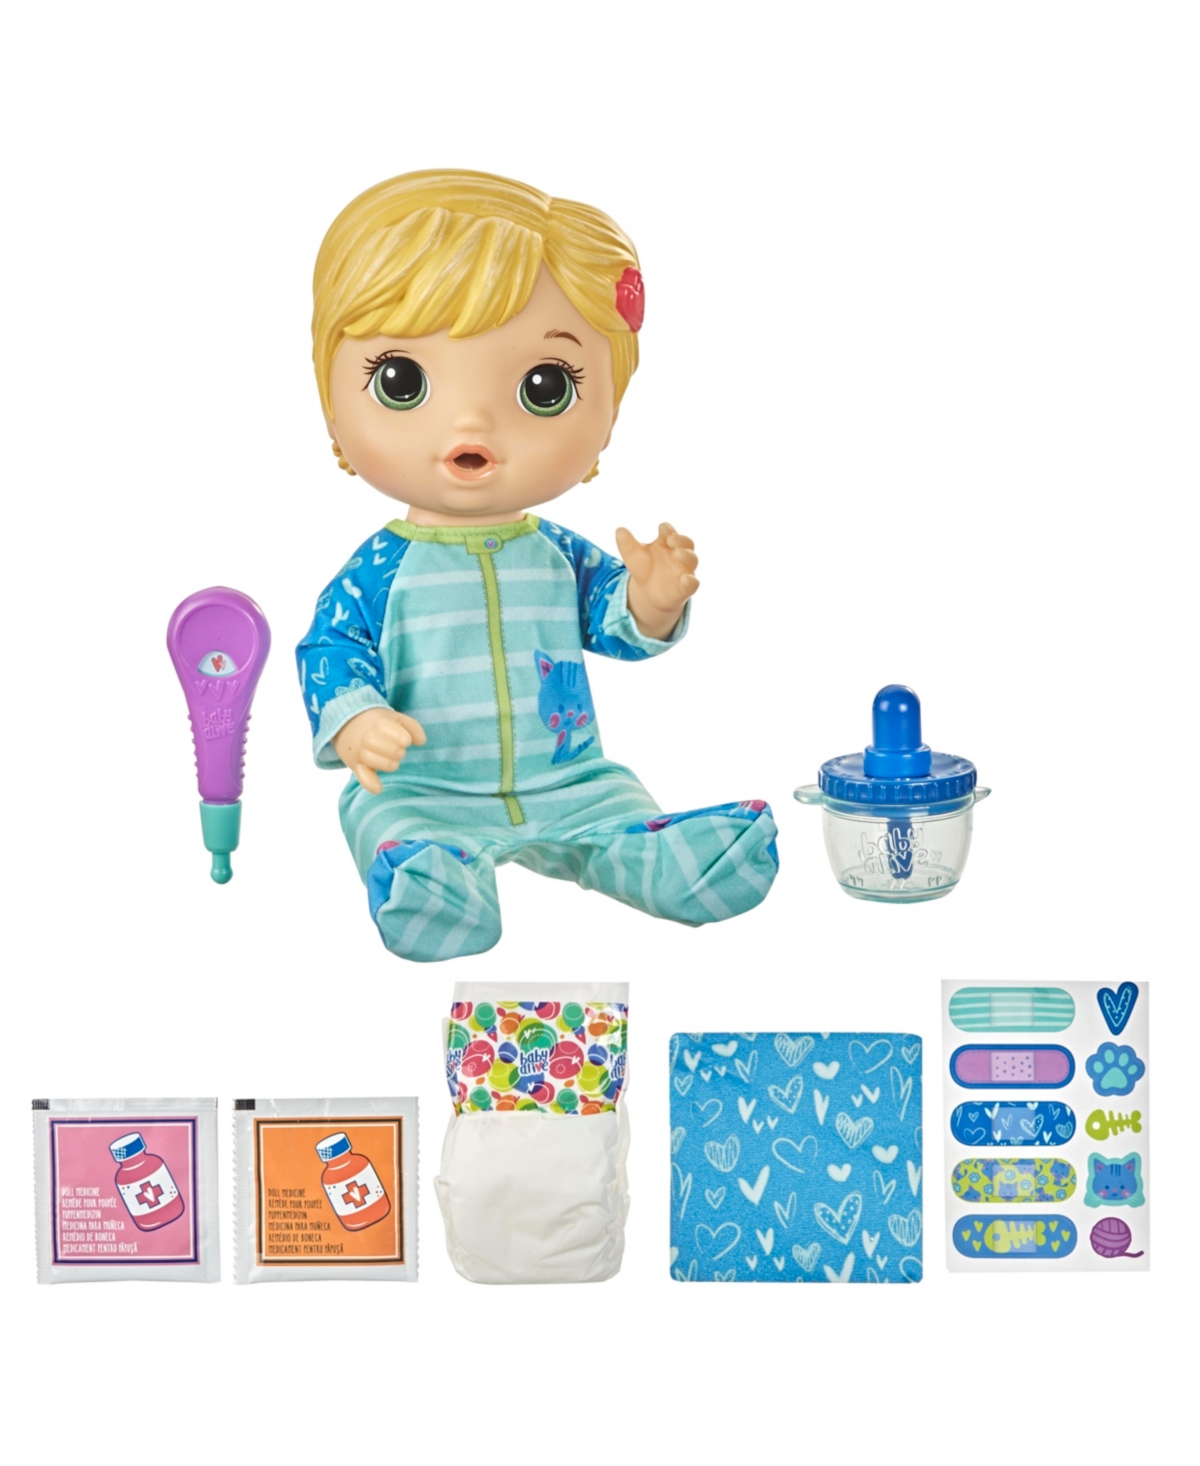 EAN 5010993659036 product image for Closeout! Baby Alive Mix My Medicine | upcitemdb.com